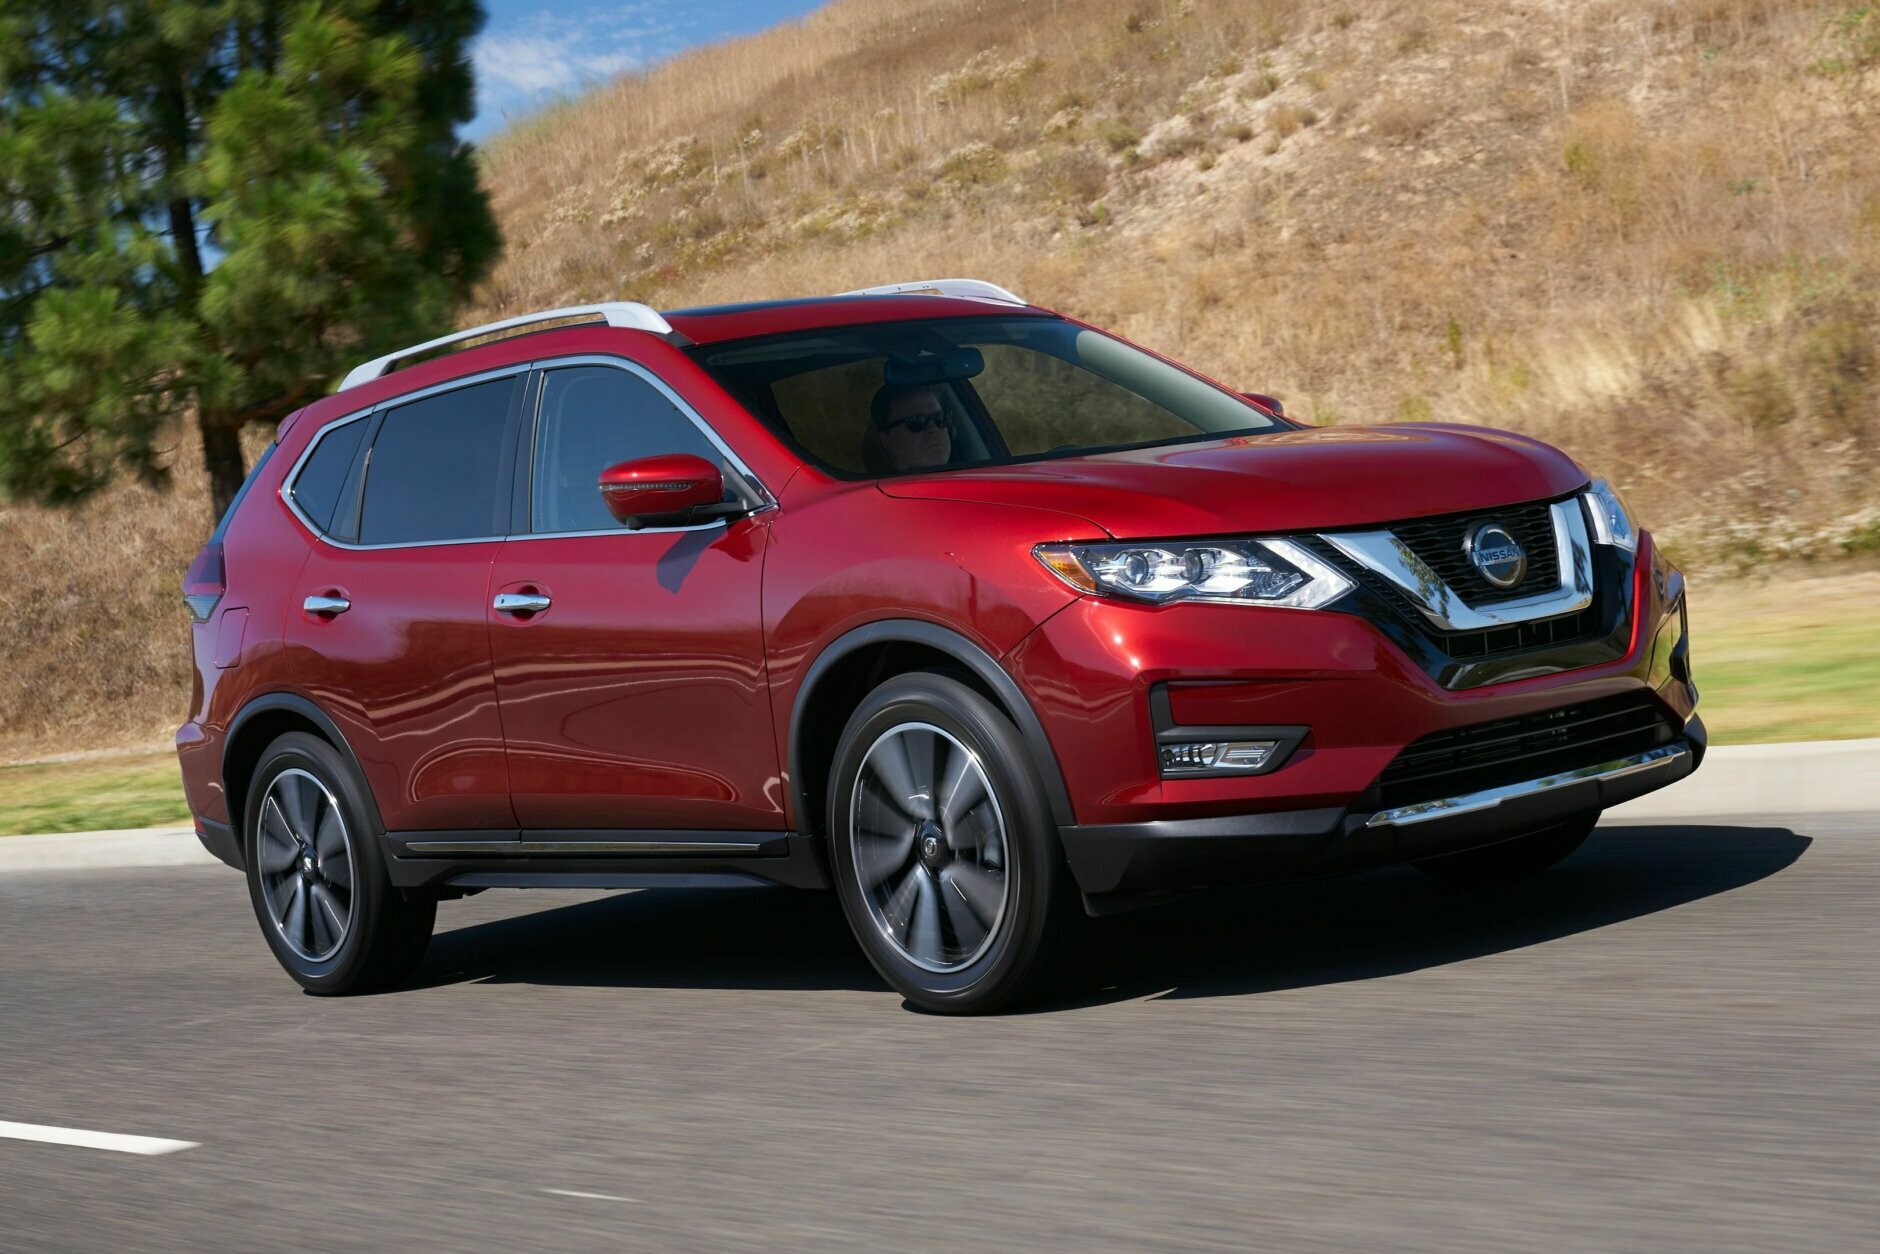 <p><strong>Best new SUV for teens, $30,000 to $35,000:</strong> The Nissan Rogue</p>
